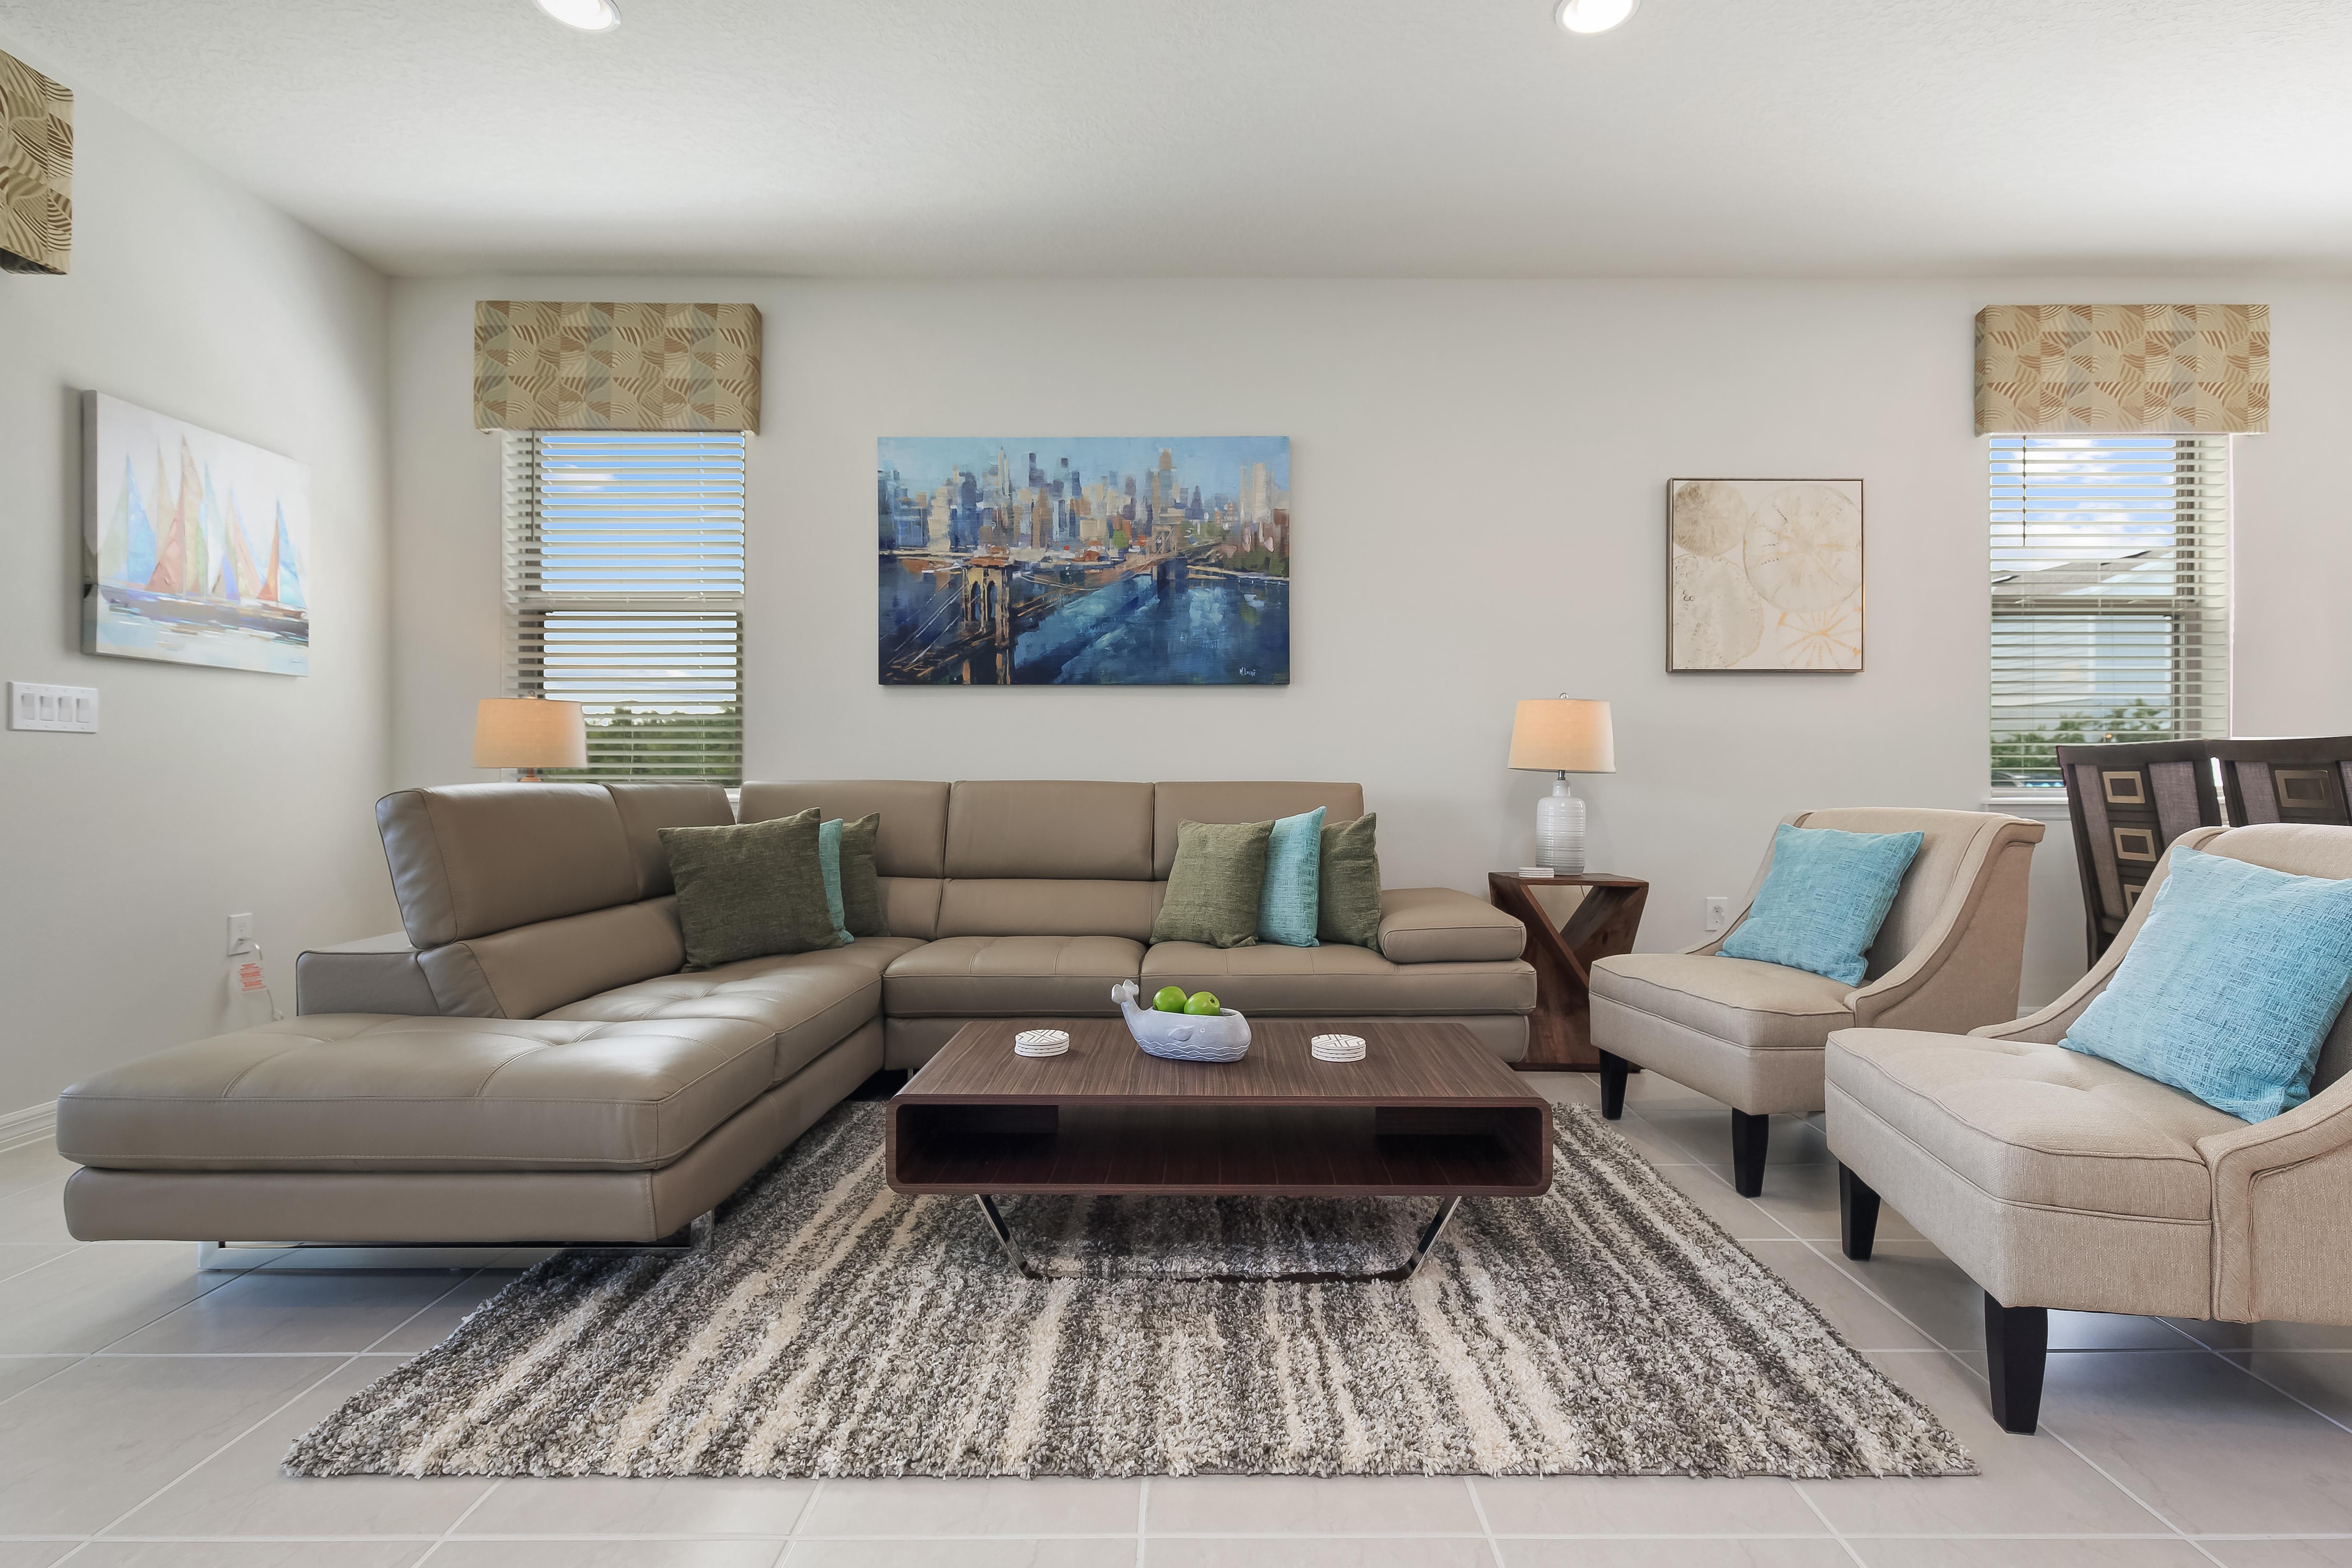 Spacious living room with comfortable furniture and flat screen TV